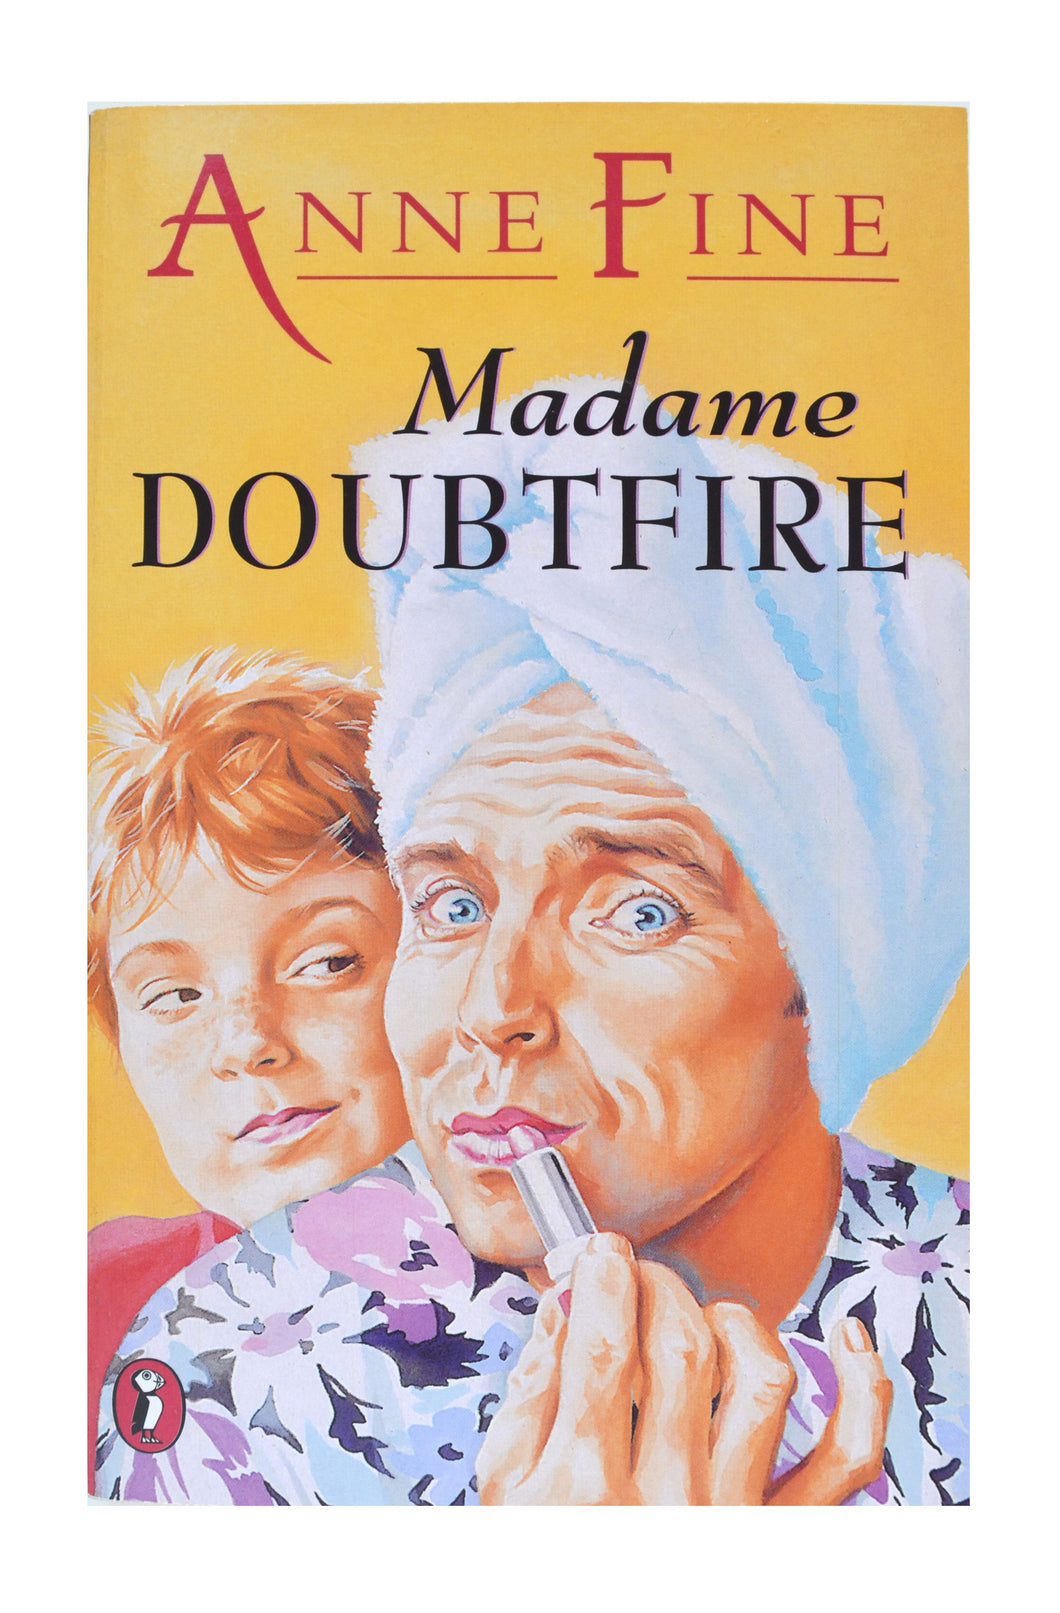 Madame Doubtfire by Anne Fine: stock image of front cover.